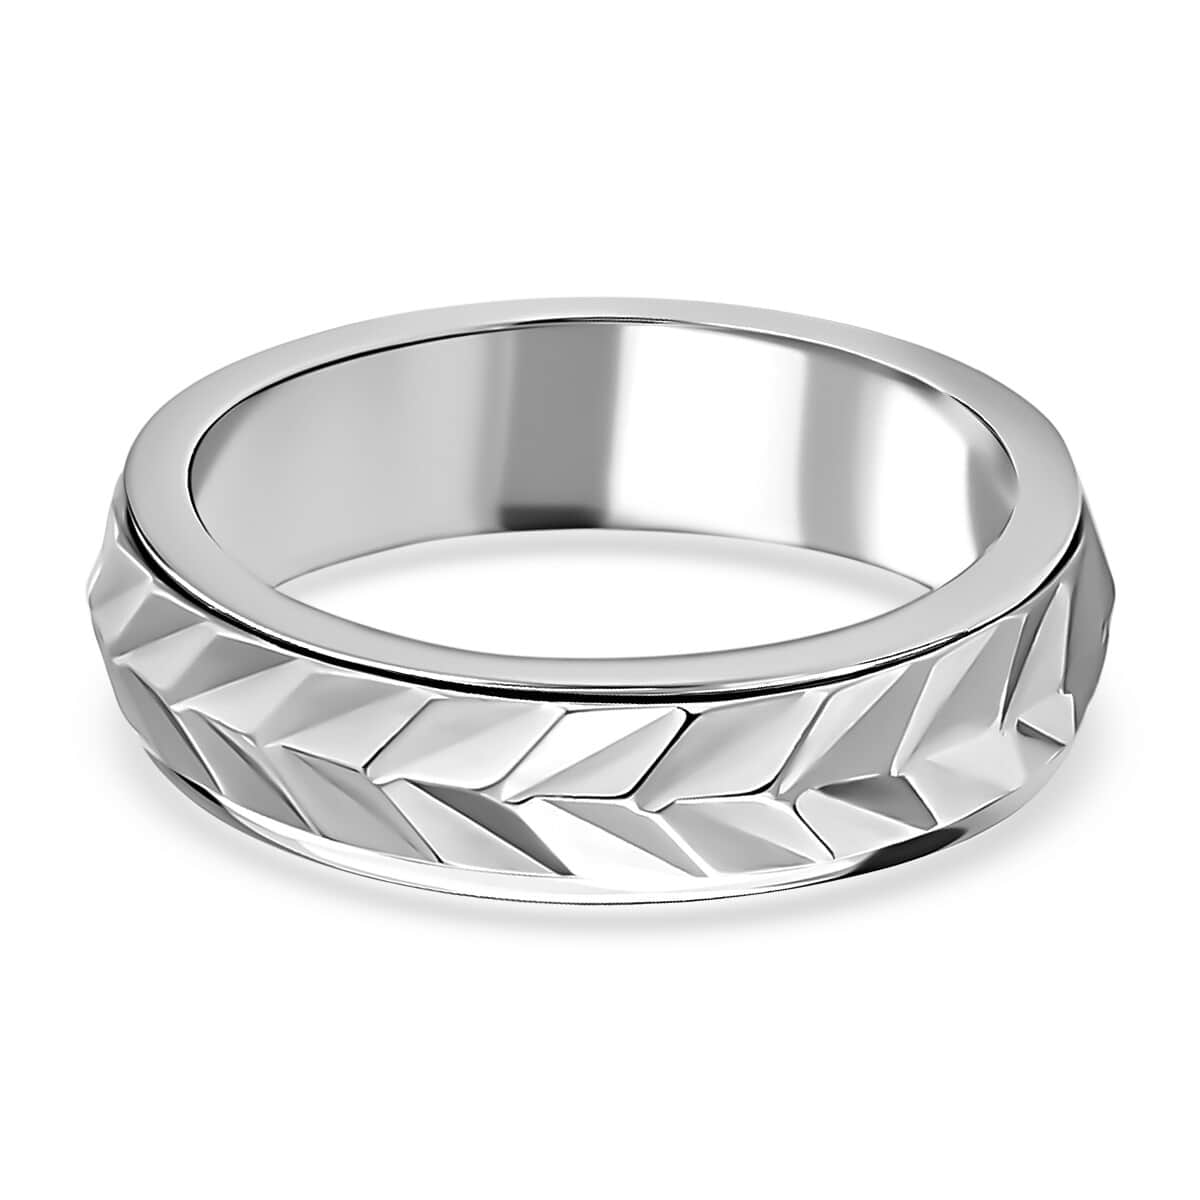 Spinner Band Ring in Platinum Over Sterling Silver, Fidget Rings for Anxiety, Stress Relieving Anxiety Ring, Wedding Band, Promise Rings 3.75 g (Size 8.0) image number 4